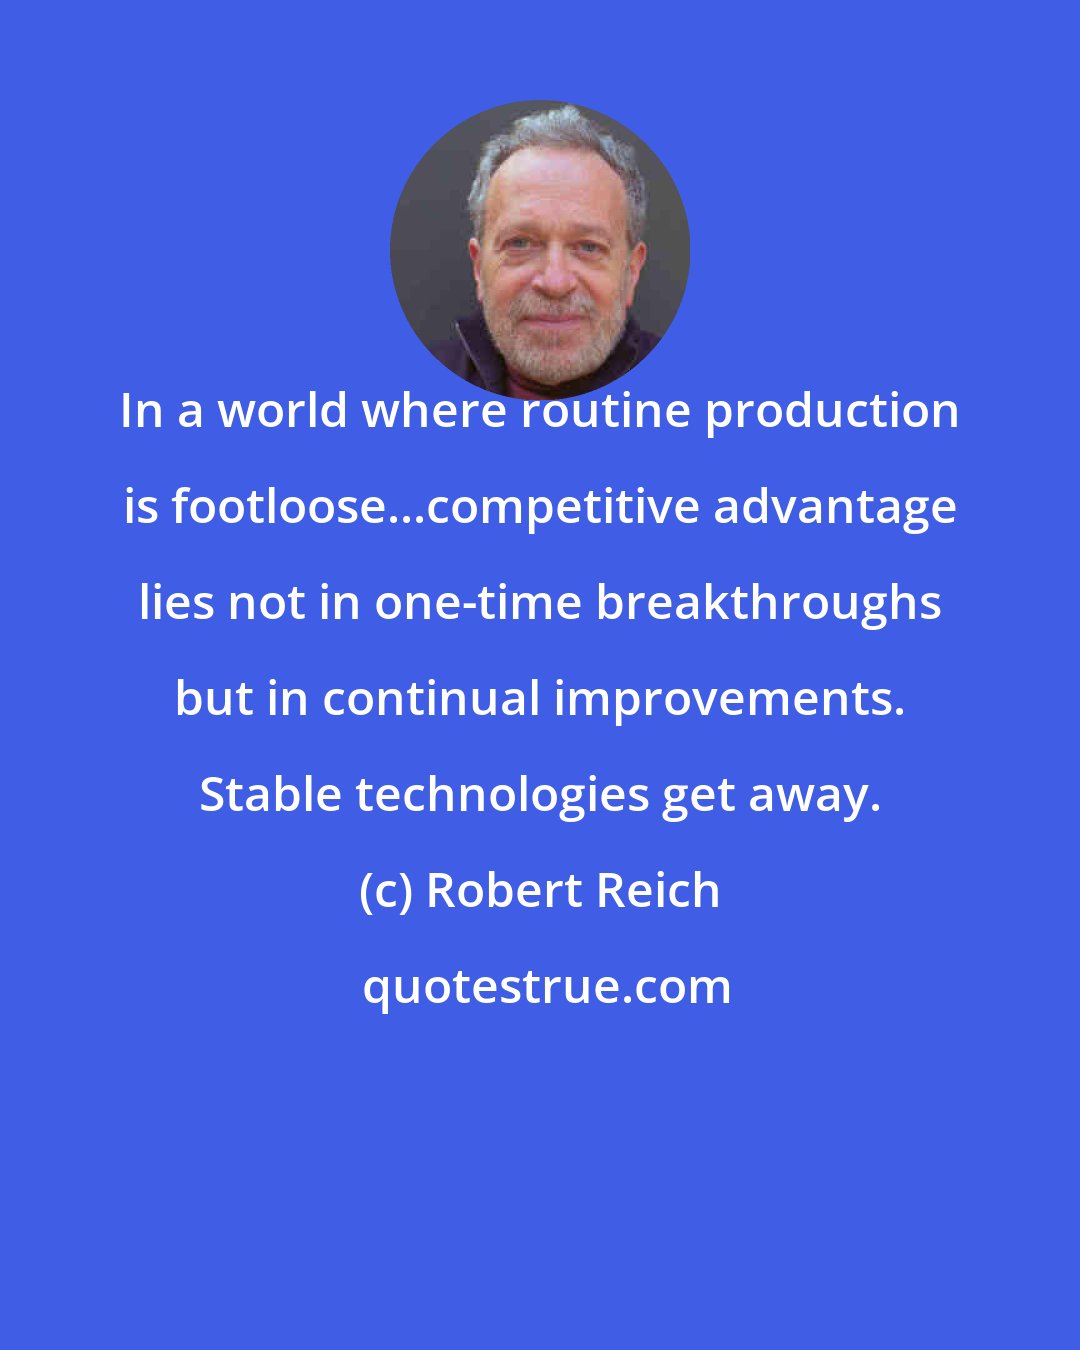 Robert Reich: In a world where routine production is footloose...competitive advantage lies not in one-time breakthroughs but in continual improvements. Stable technologies get away.